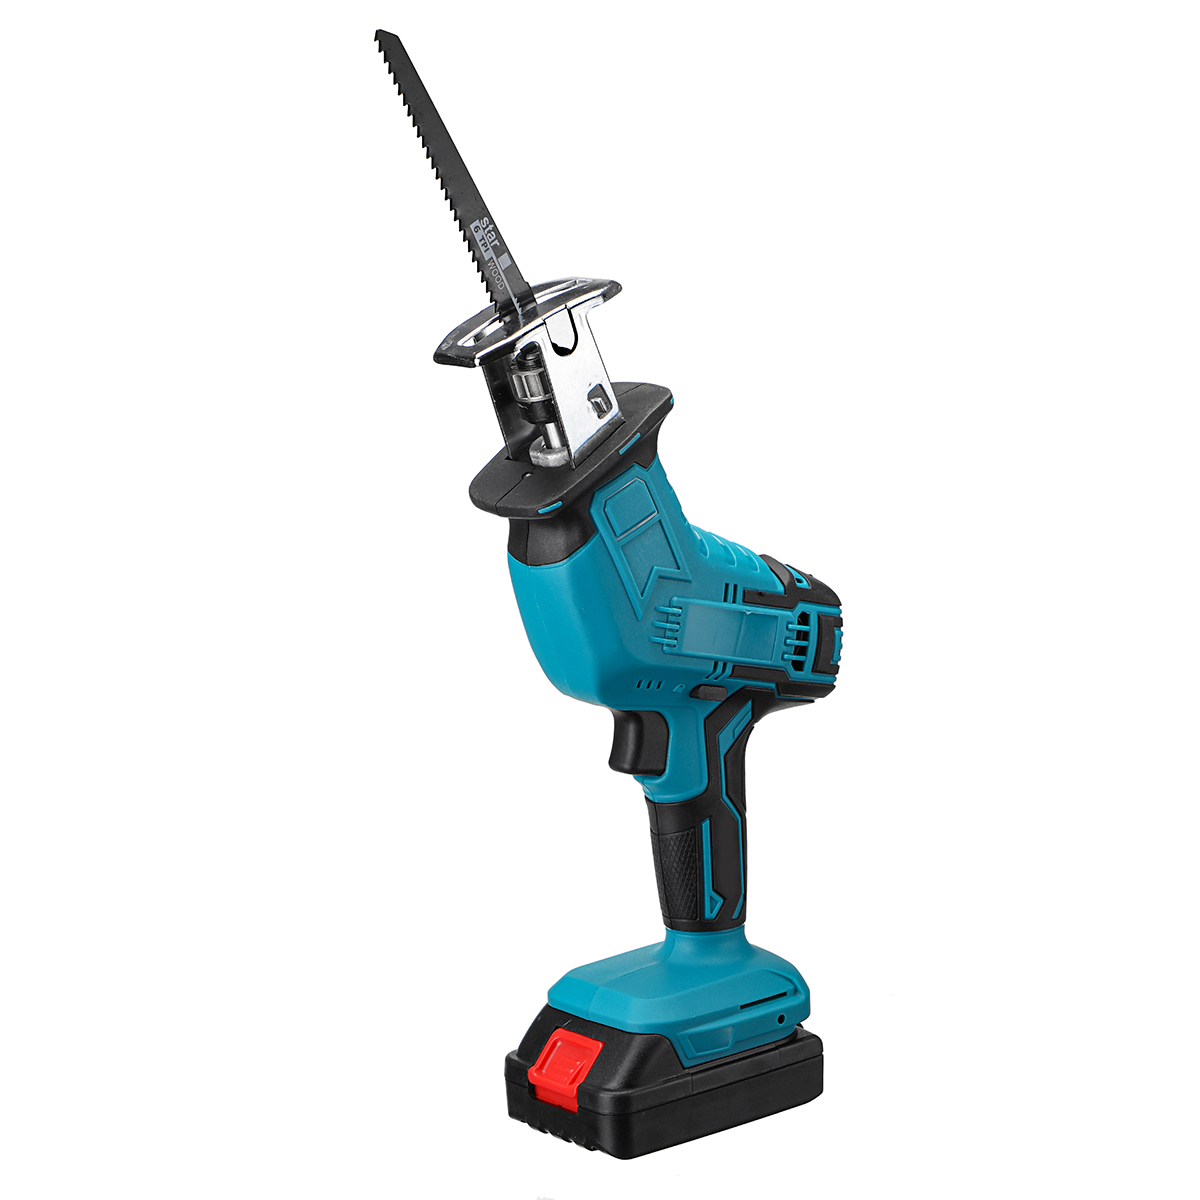 21V-Cordless-Reciprocating-Saw-Electric-Sabre-Saw-Woodworking-Wood-Metal-Cutting-Tool-1762480-6